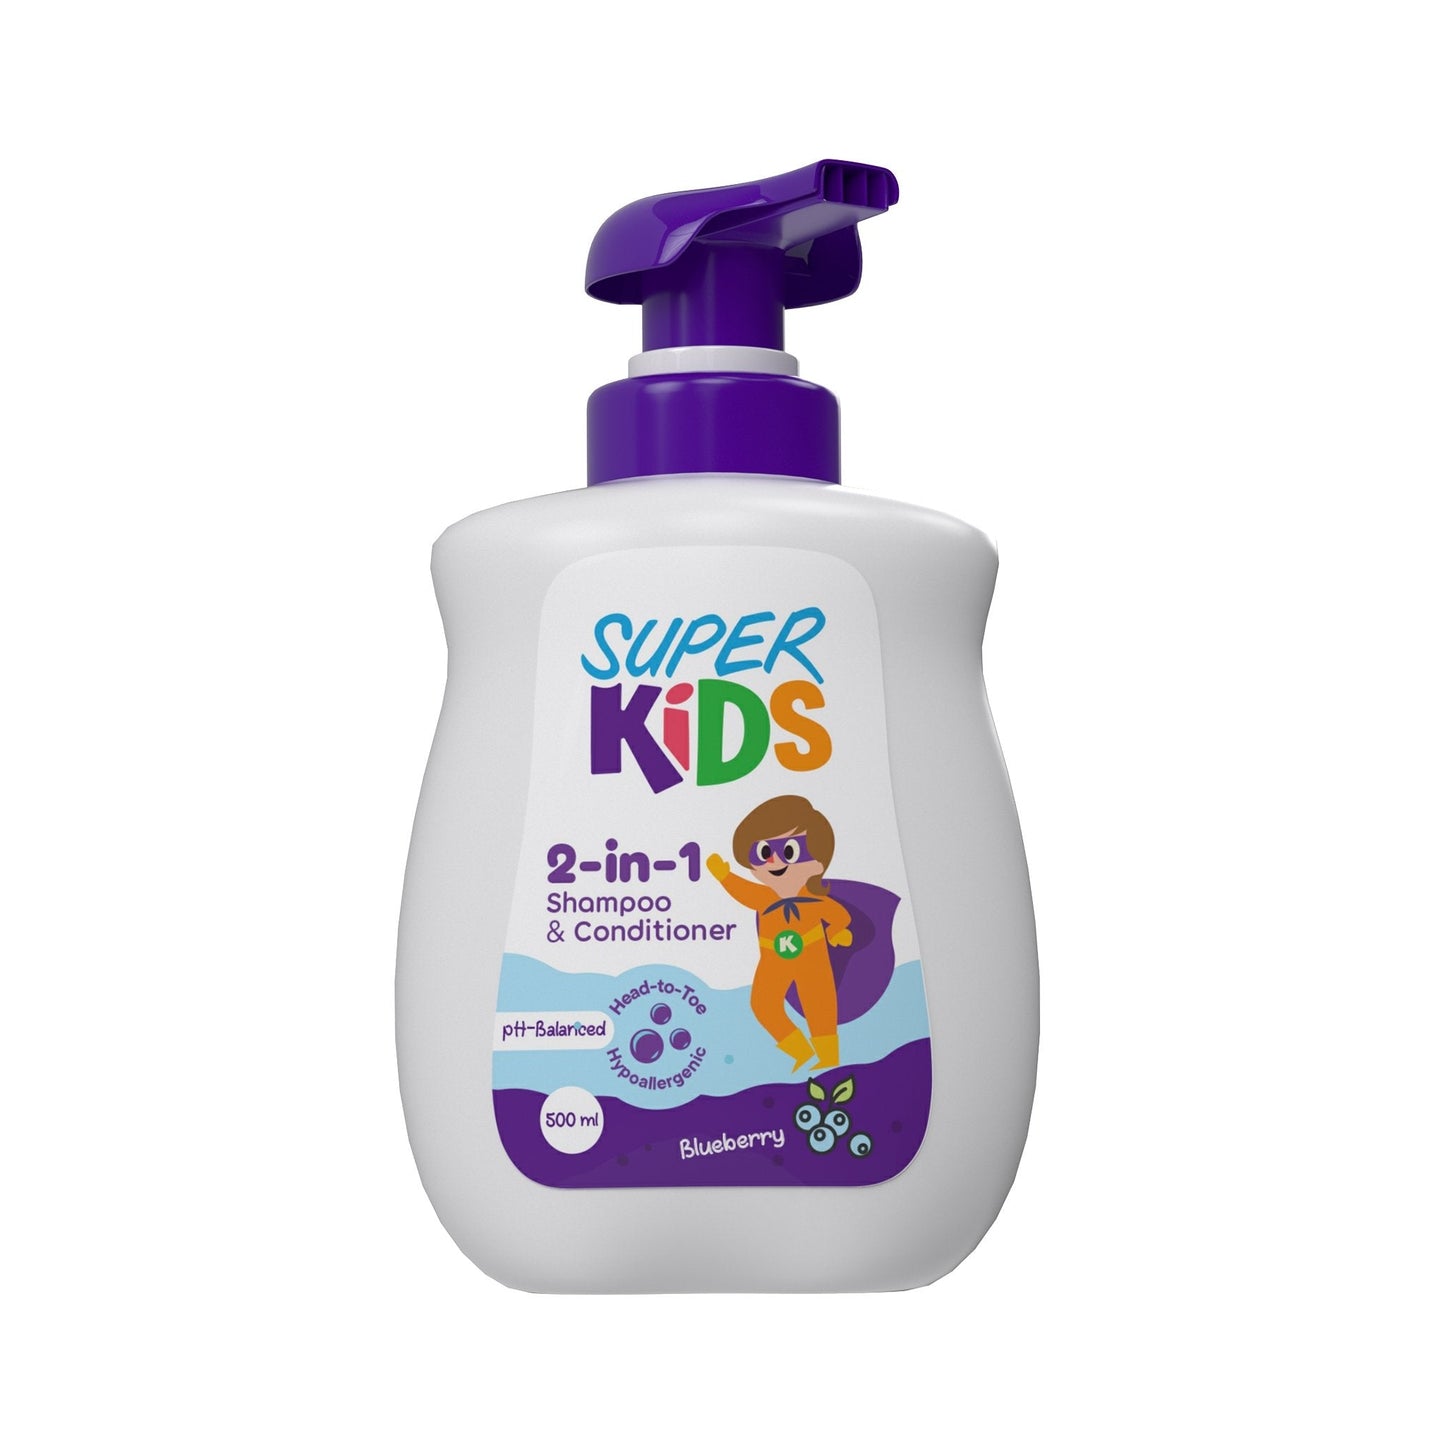 SuperKids 2-in-1 Shampoo & Conditioner  with Blueberry Fragrance - 500ml